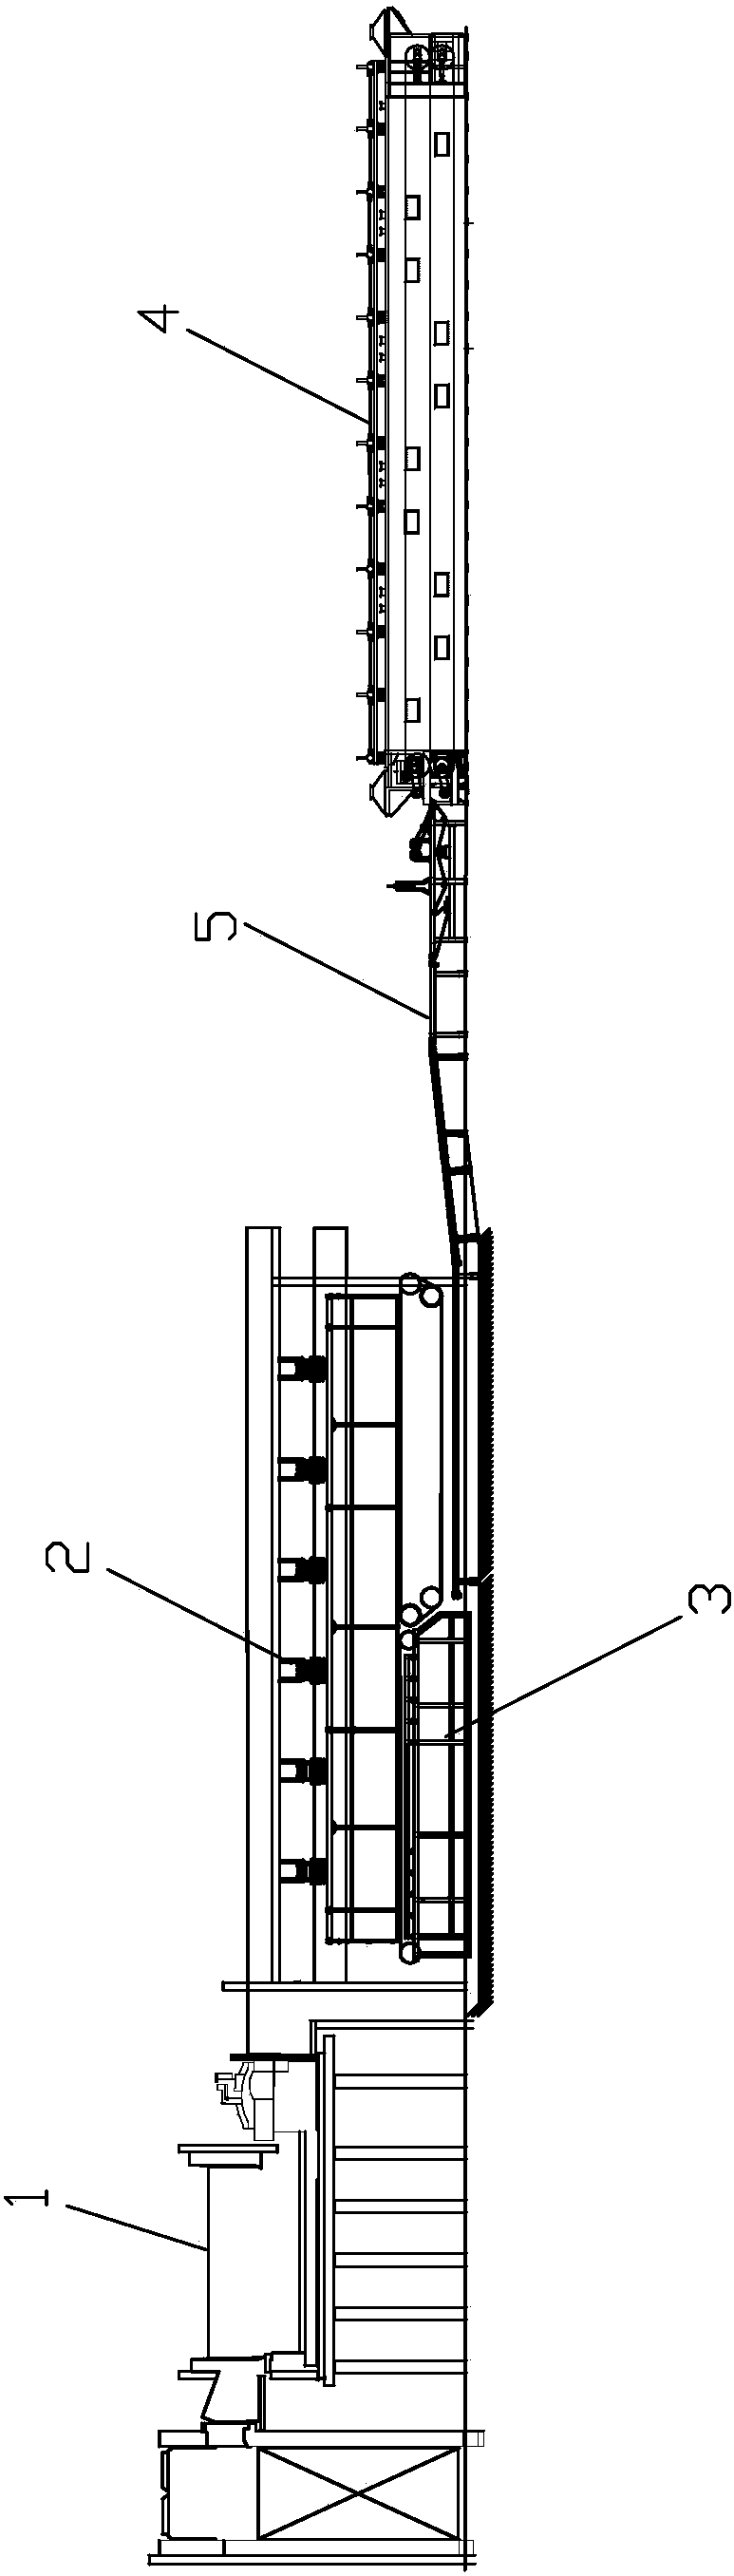 A production system and method for an on-line dry-process glass wool vacuum insulation board core material